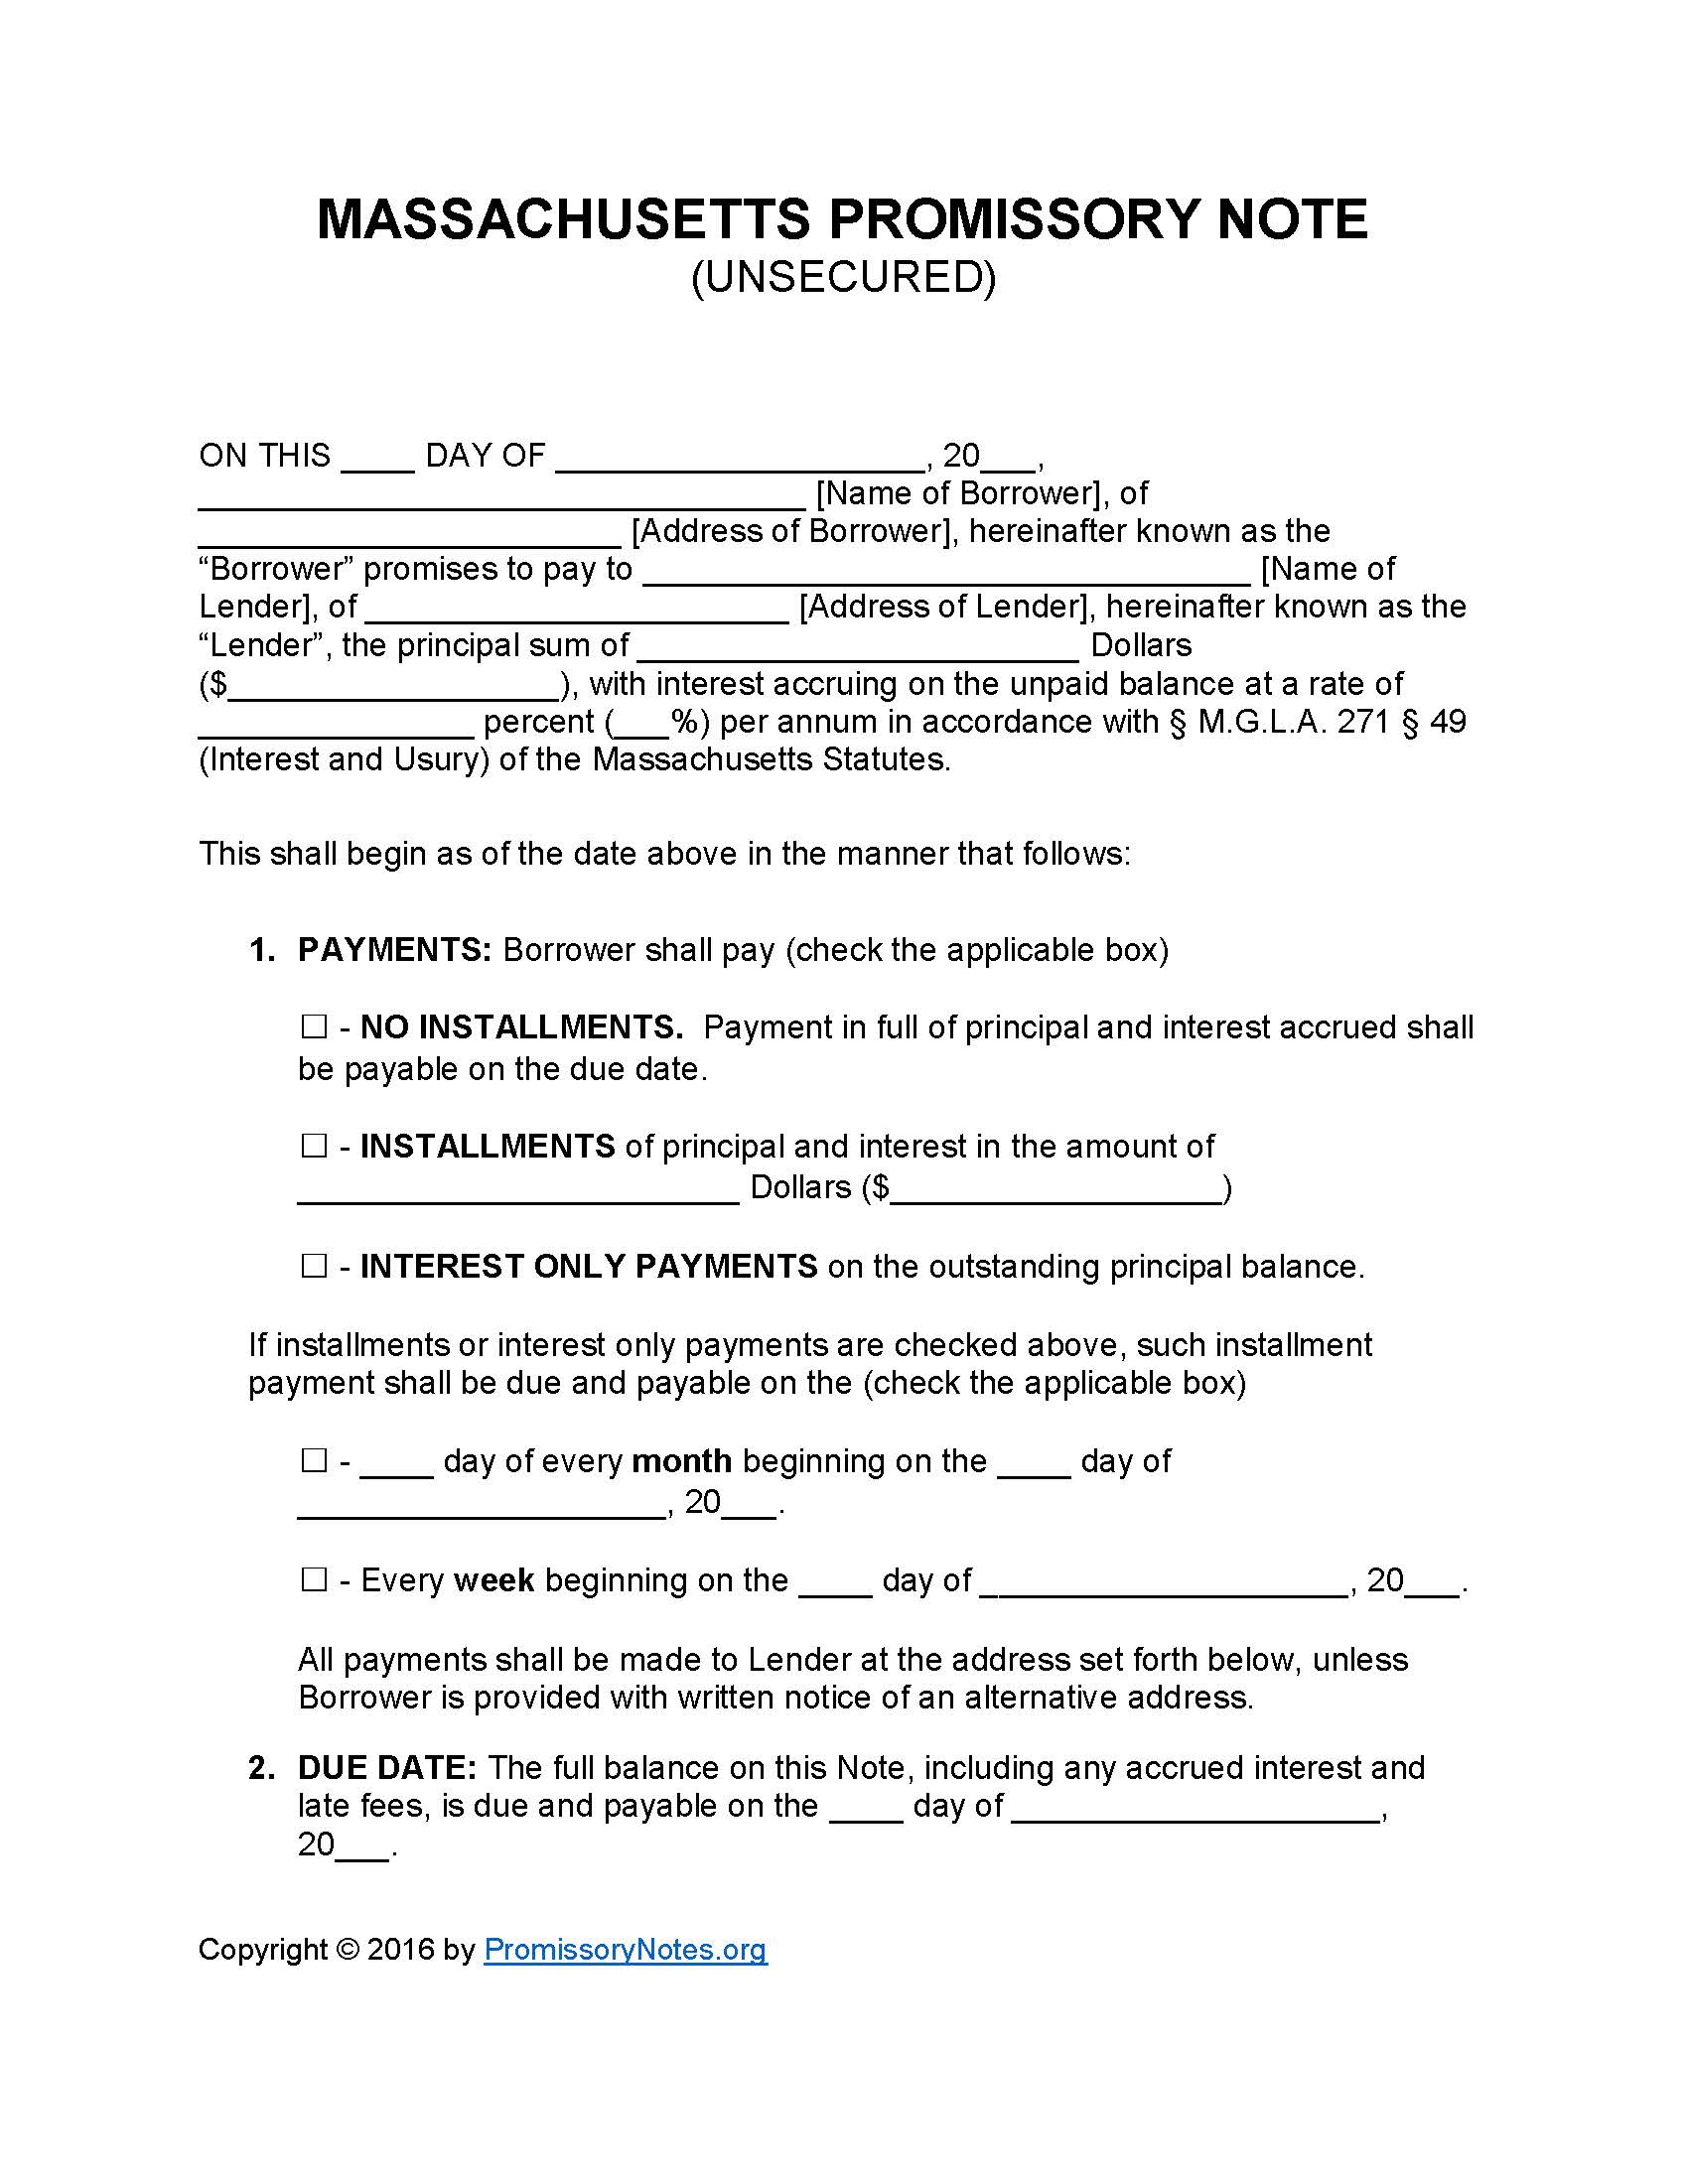 massachusetts-unsecured-promissory-note-form